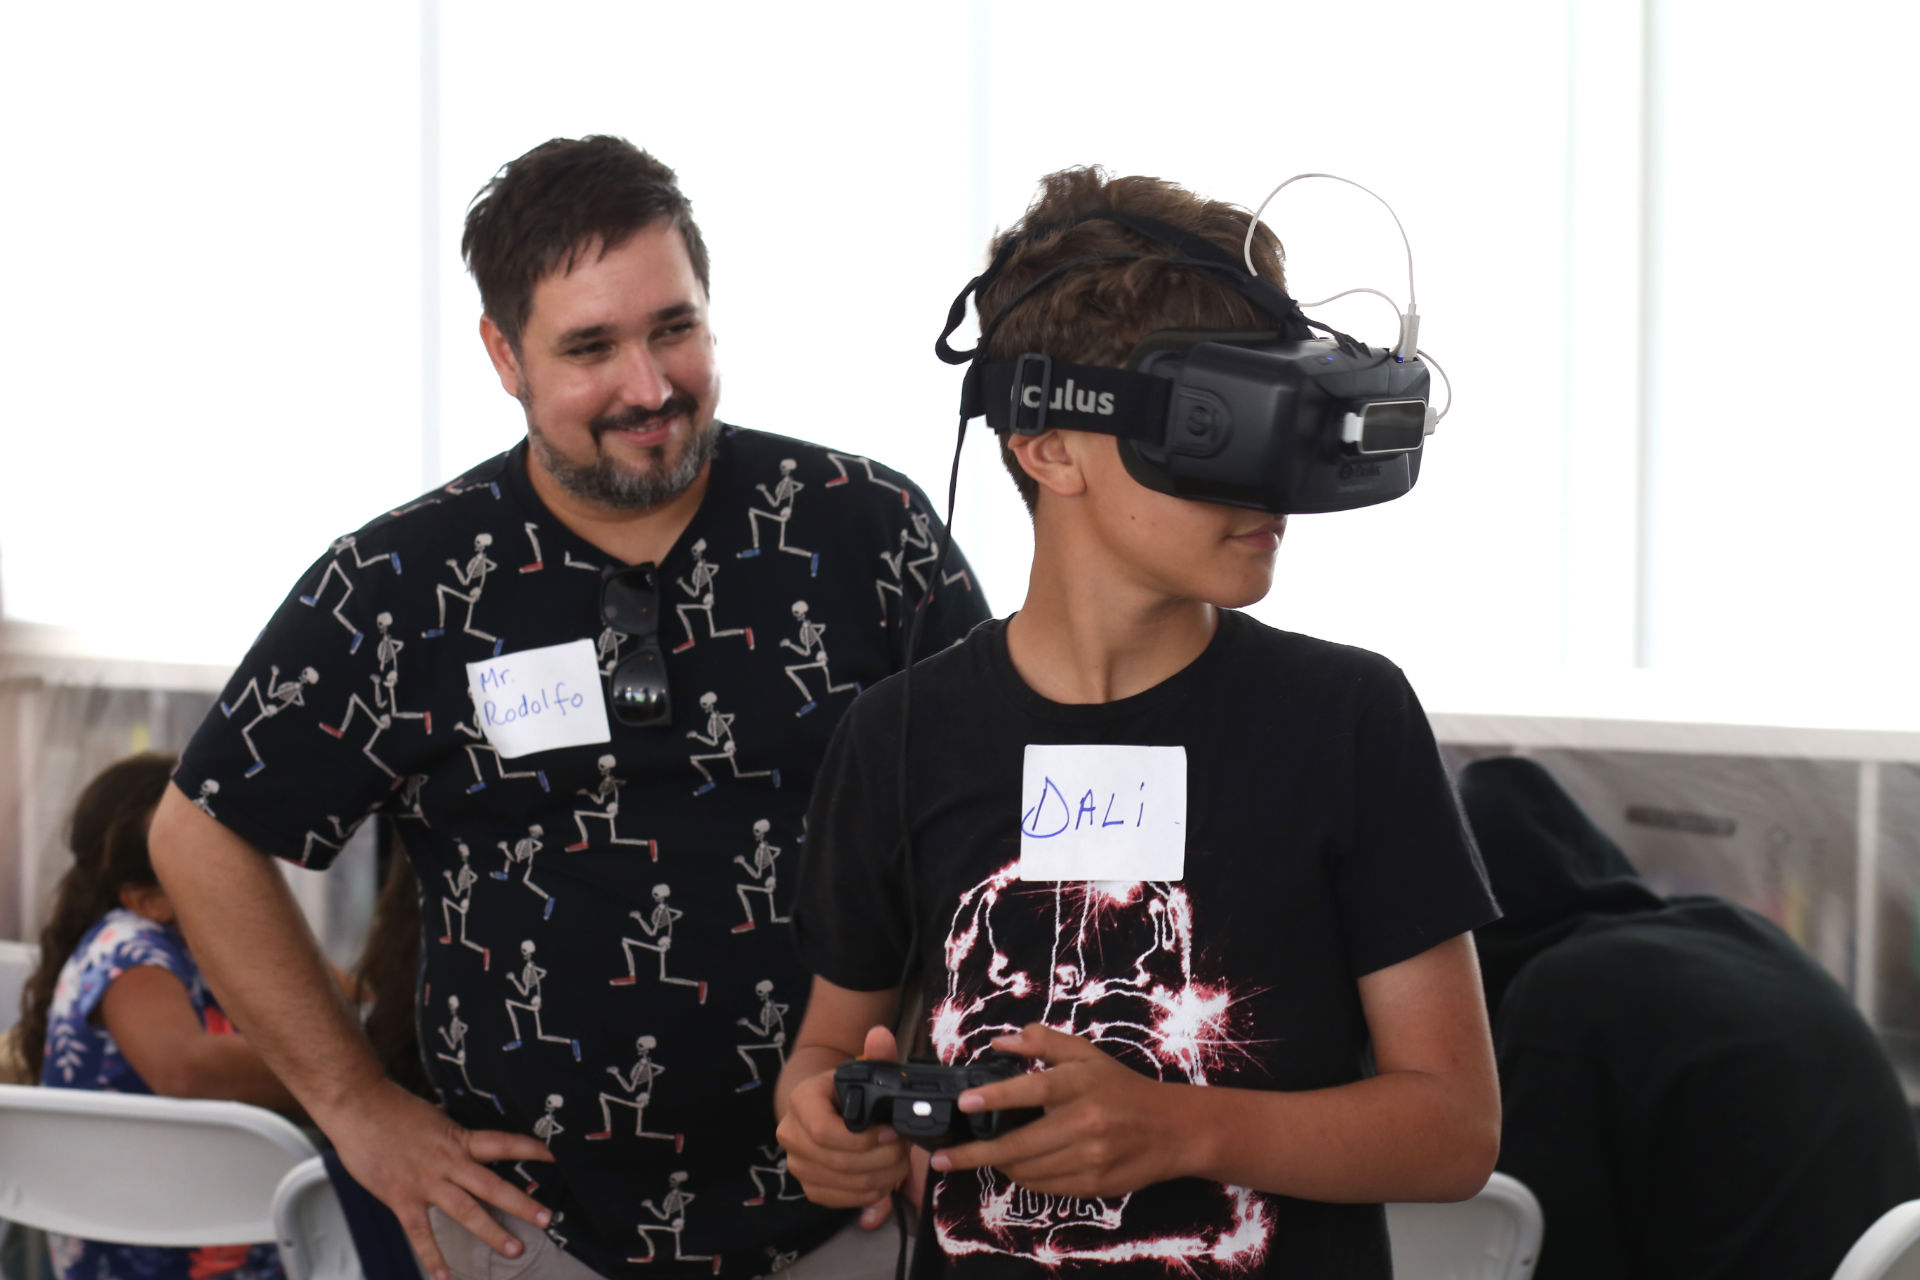 A boy using an Oculus and playing, and a Man smiling behind him